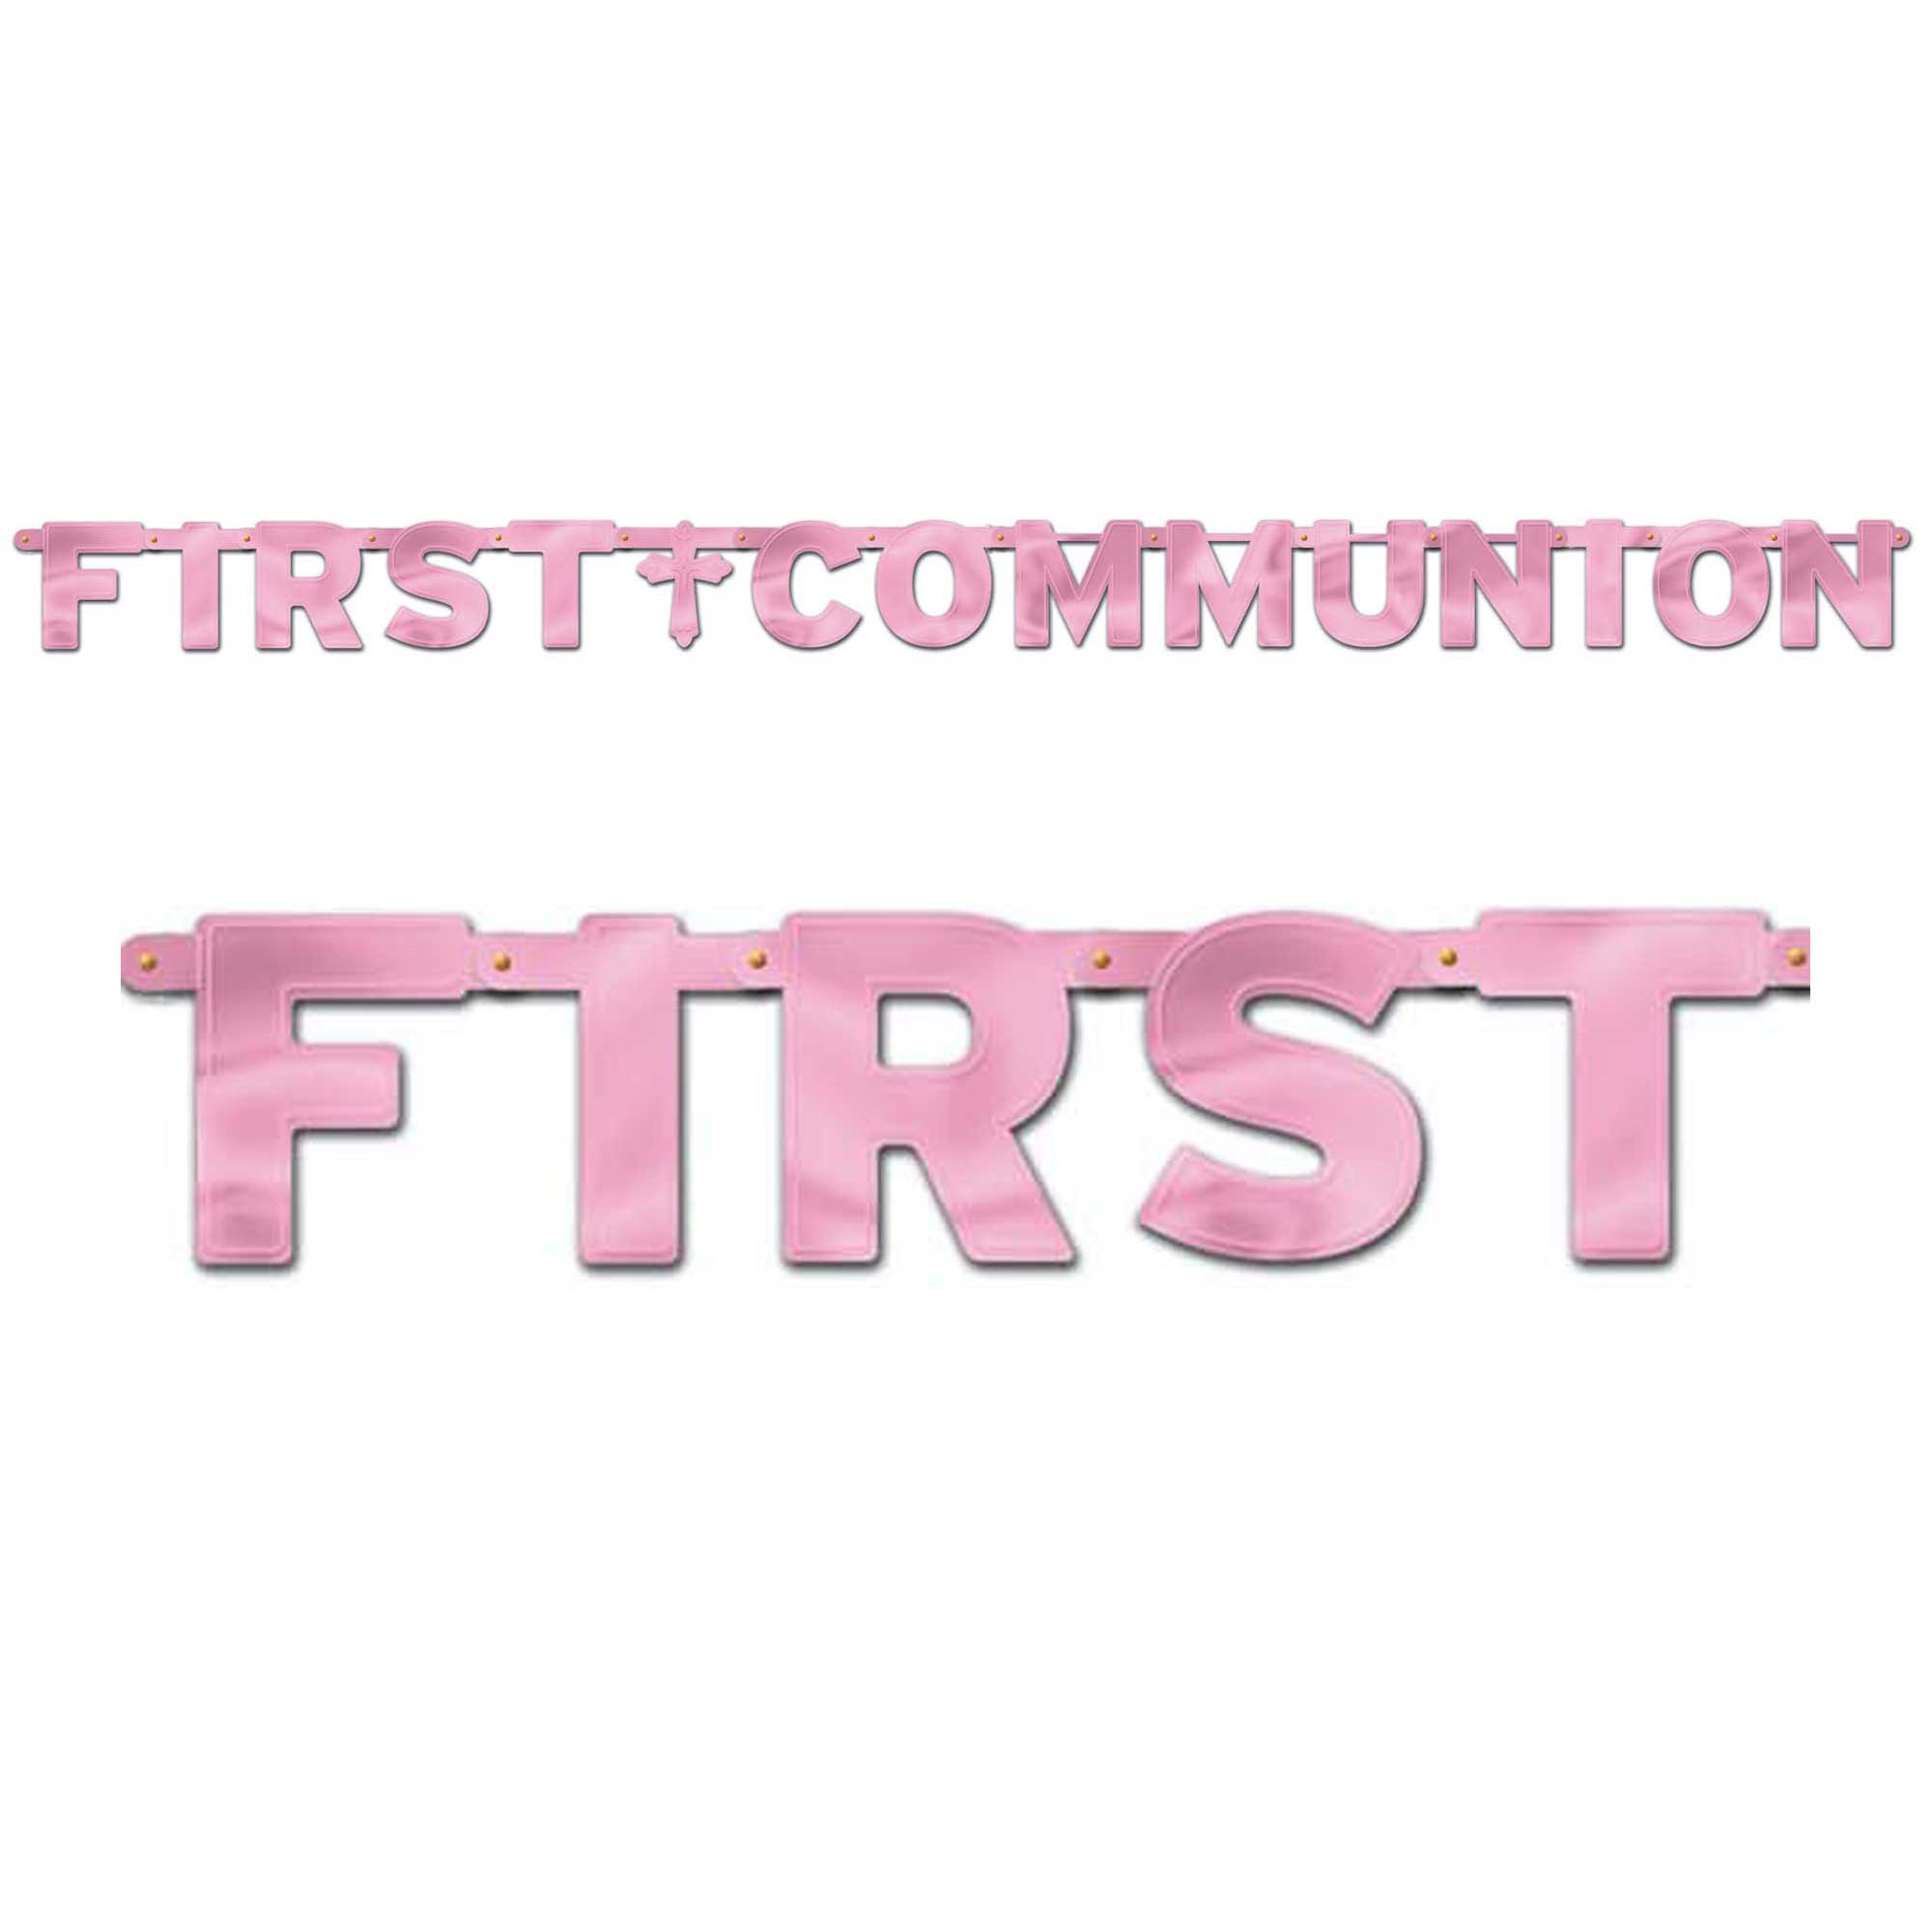 First Communion Pink Letter Banner 8 3/4ft x 12in Decorations - Party Centre